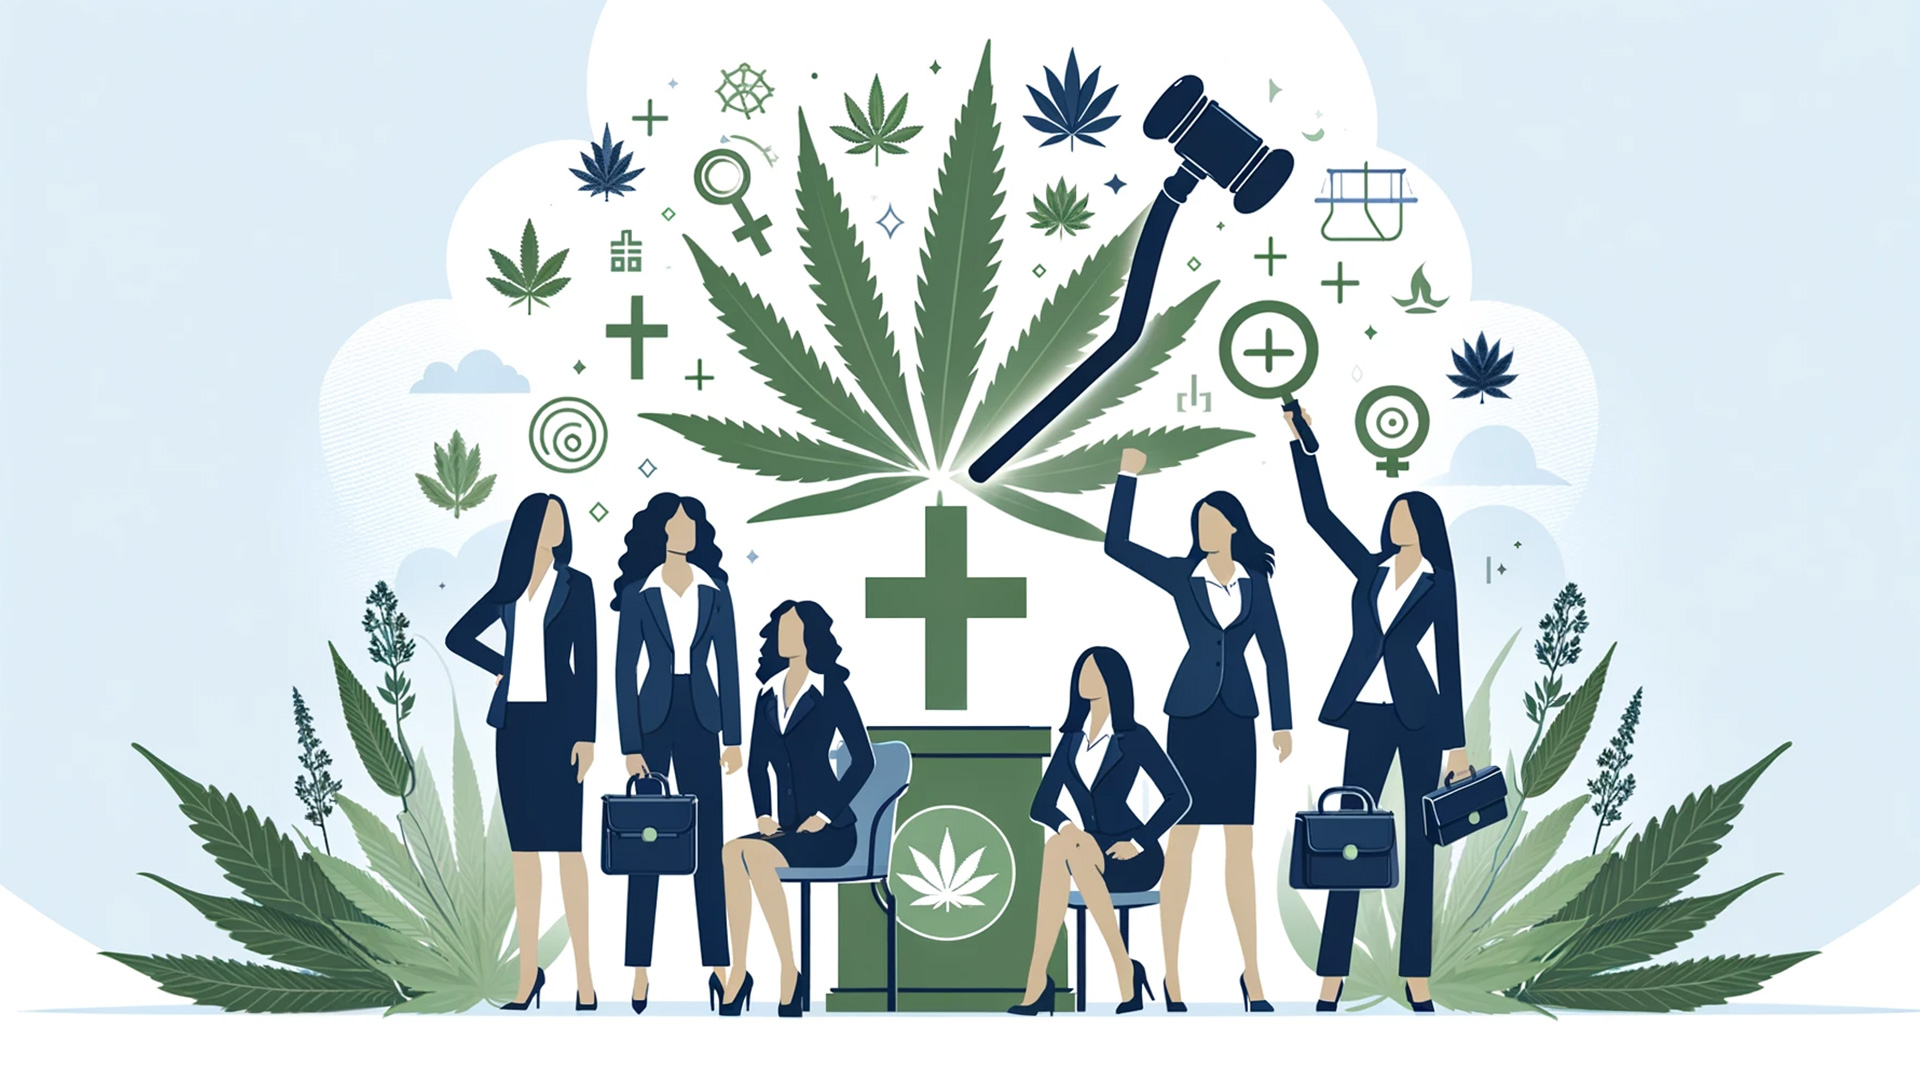 Diverse women with cannabis motifs, symbolizing their impact in the cannabis sector